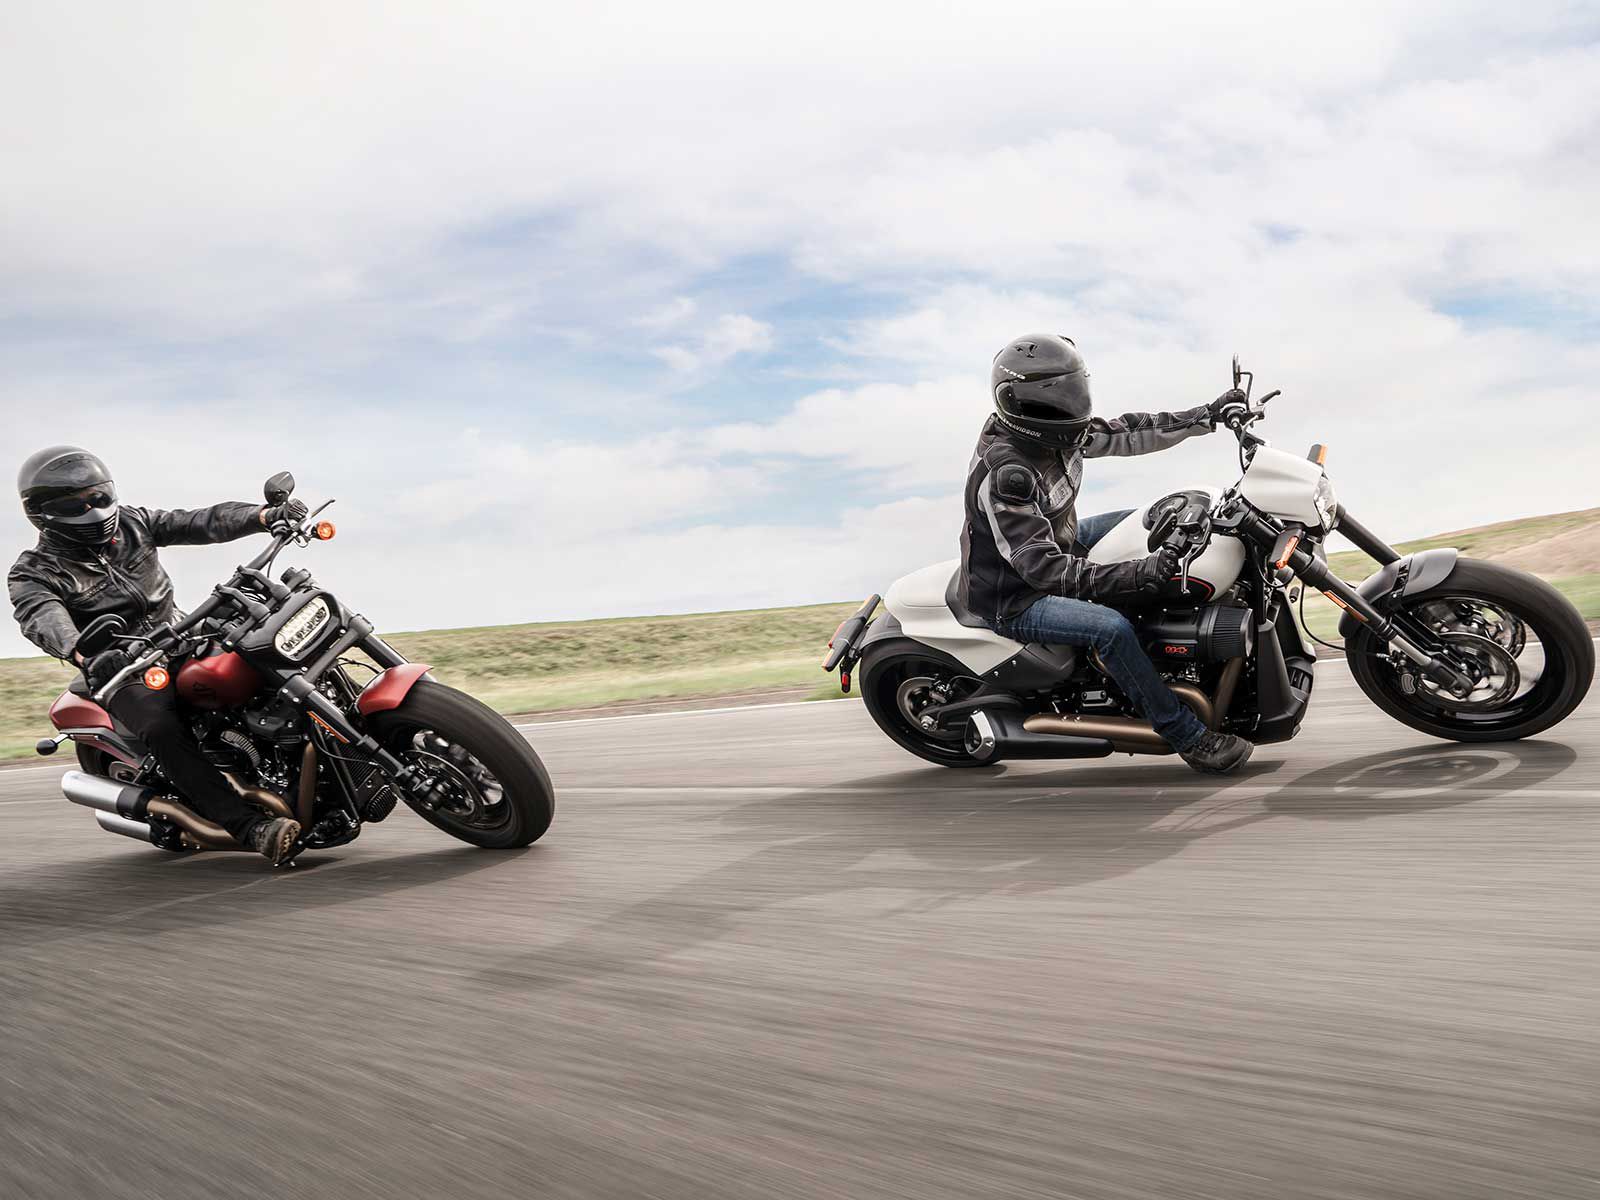 2019 Harley Davidson Fxdr Power Cruiser First Look Preview Motorcyclist